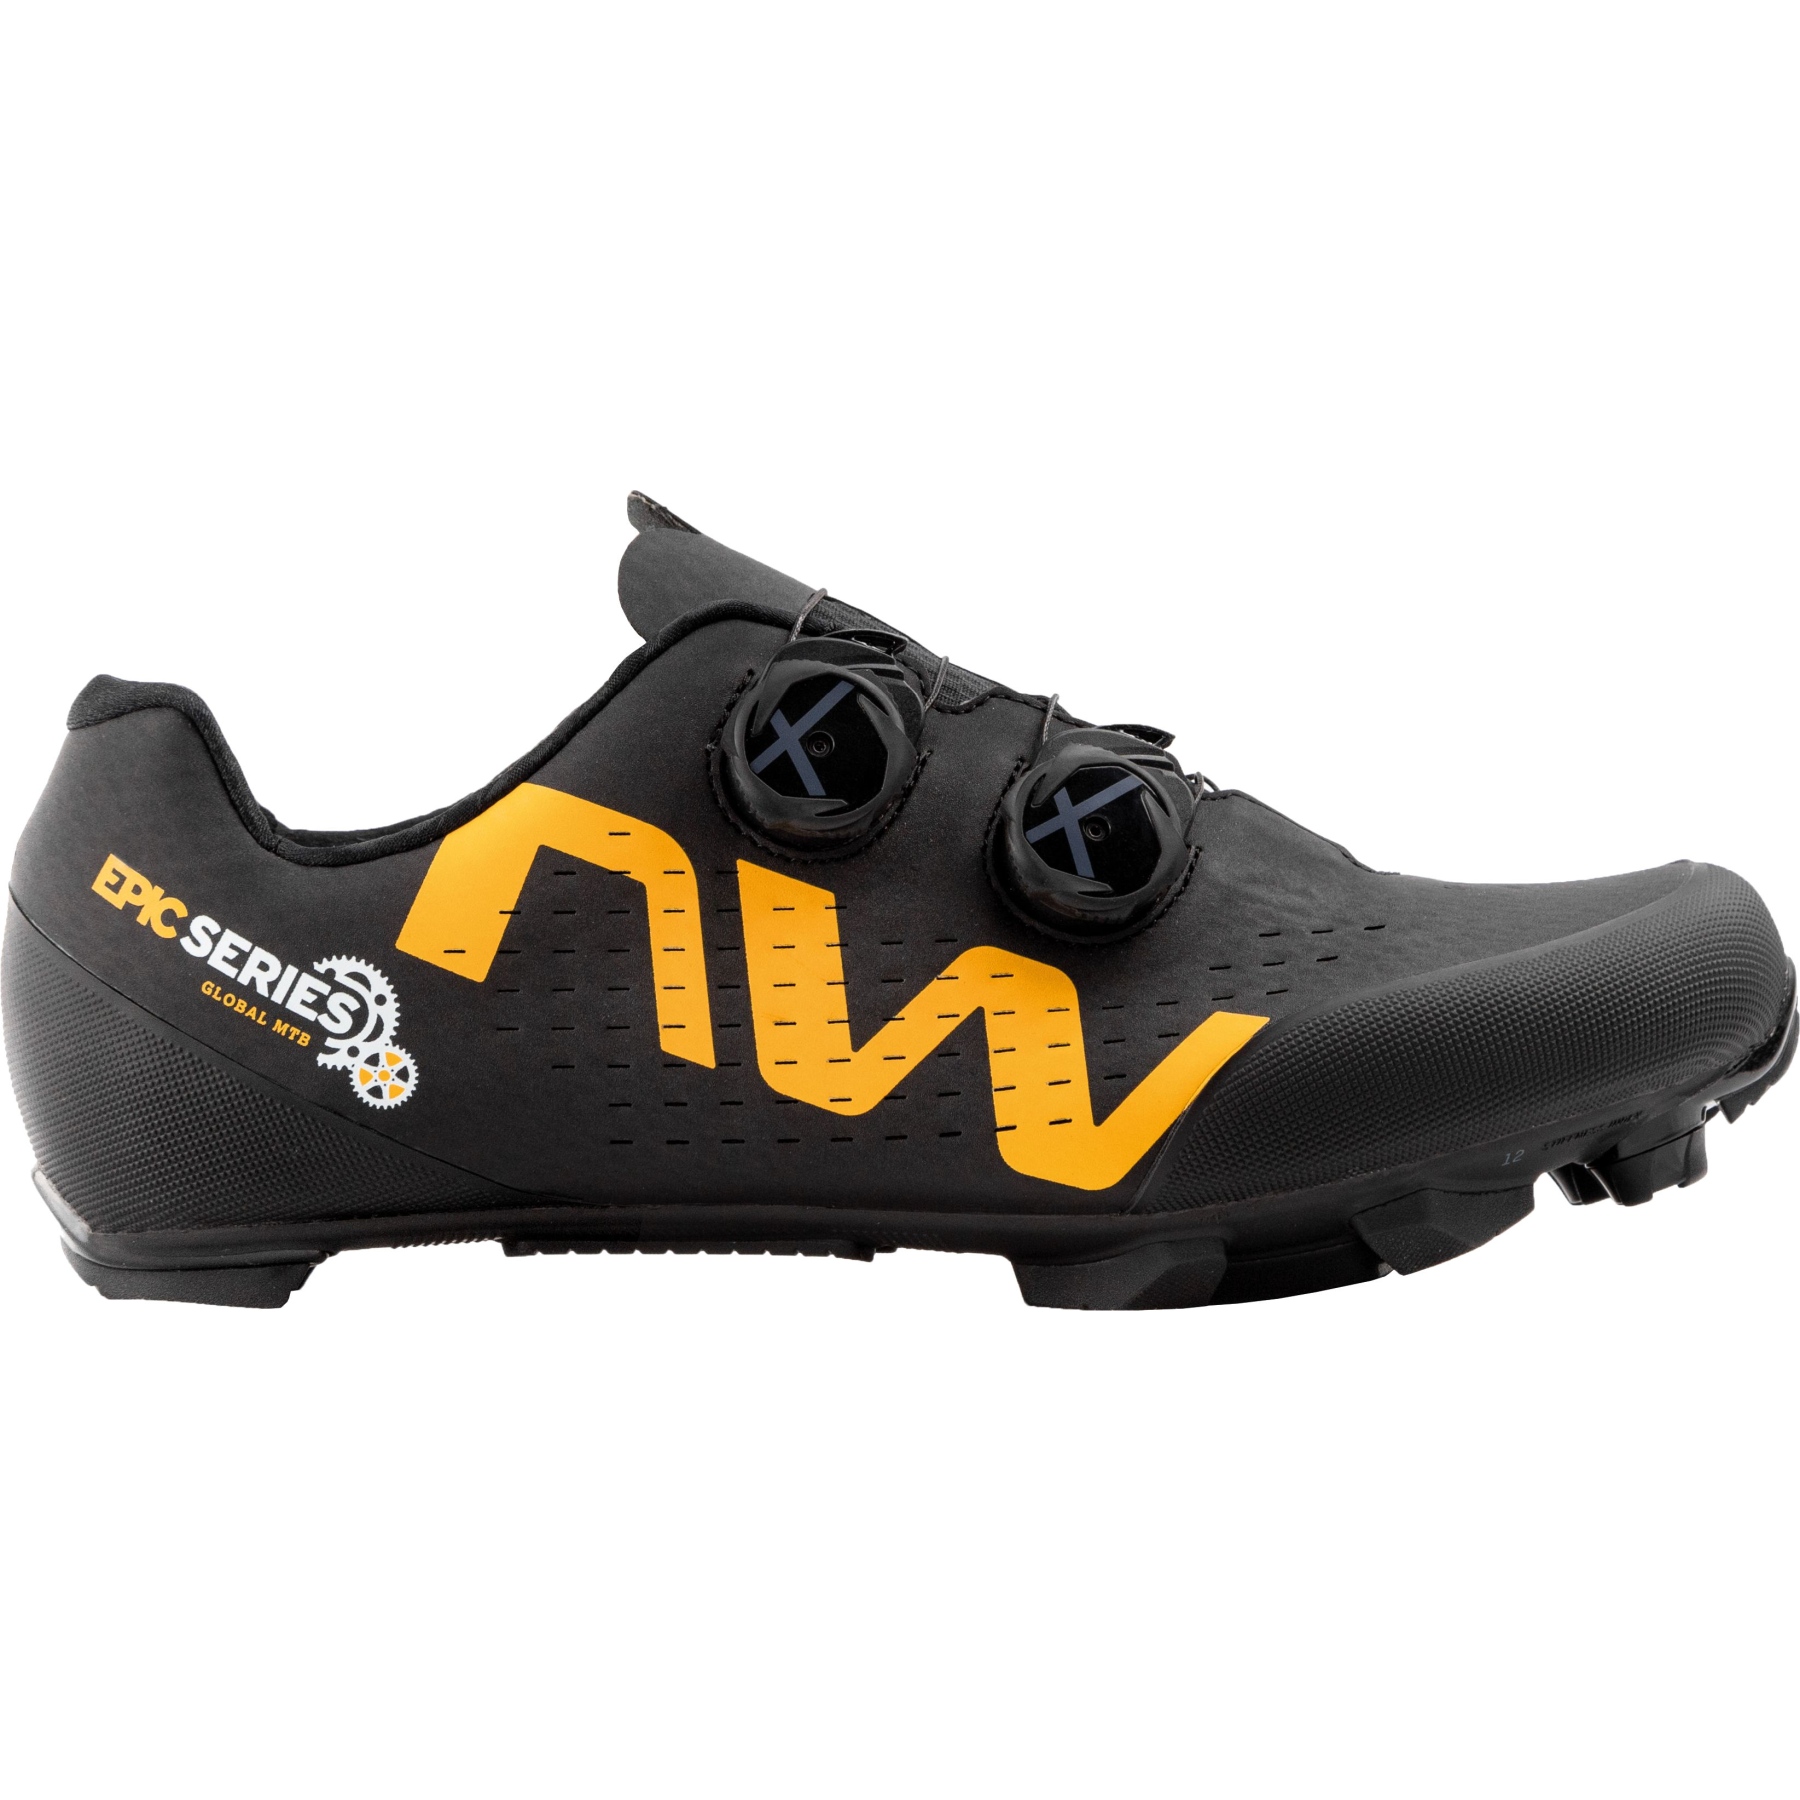 Picture of Northwave Rebel 3 Epic Series MTB Shoes - black/yellow 68